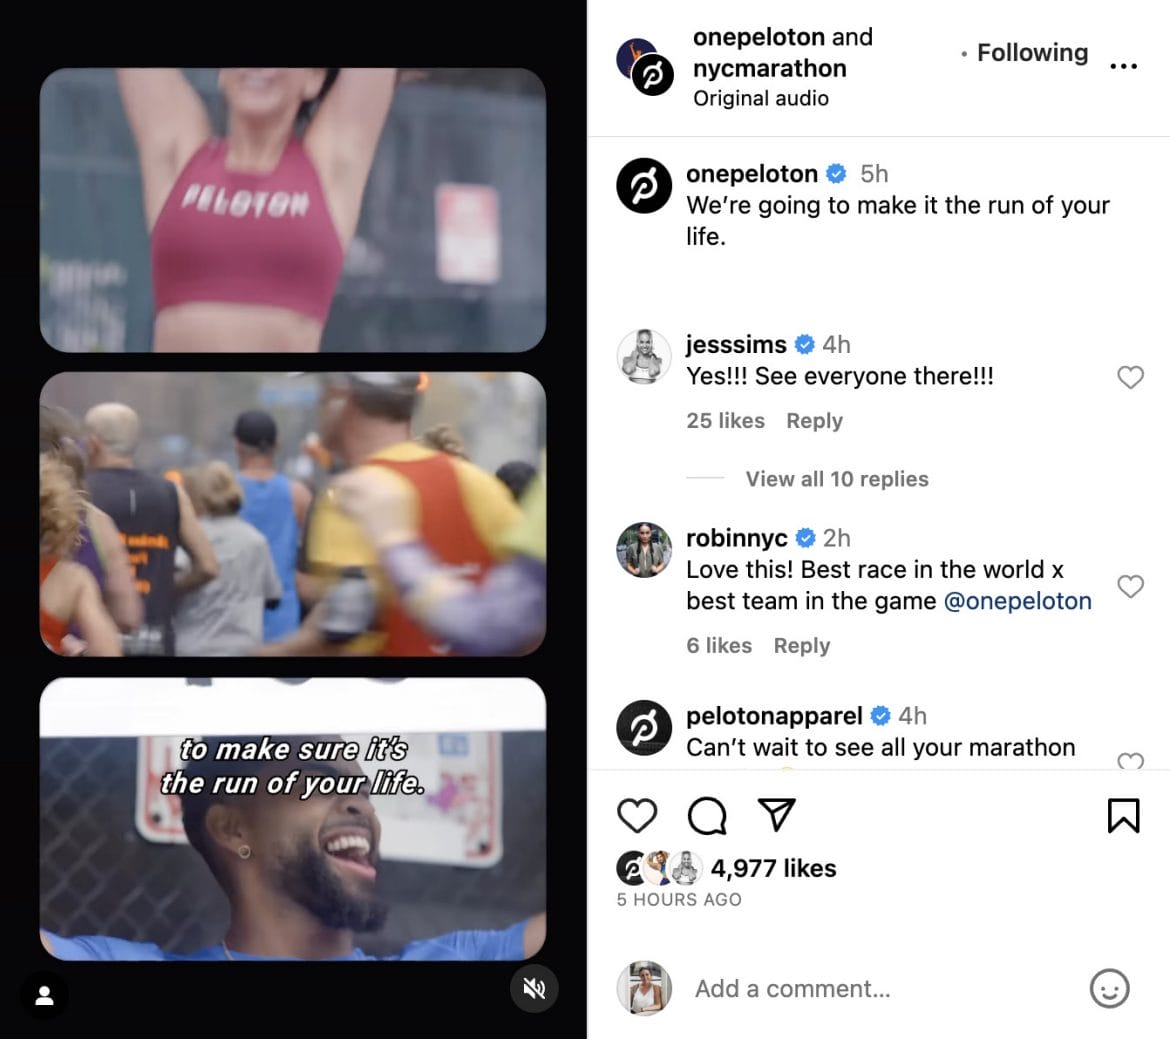 @OnePeloton Instagram post announcing partnership with New York Road Runners (NYRR)